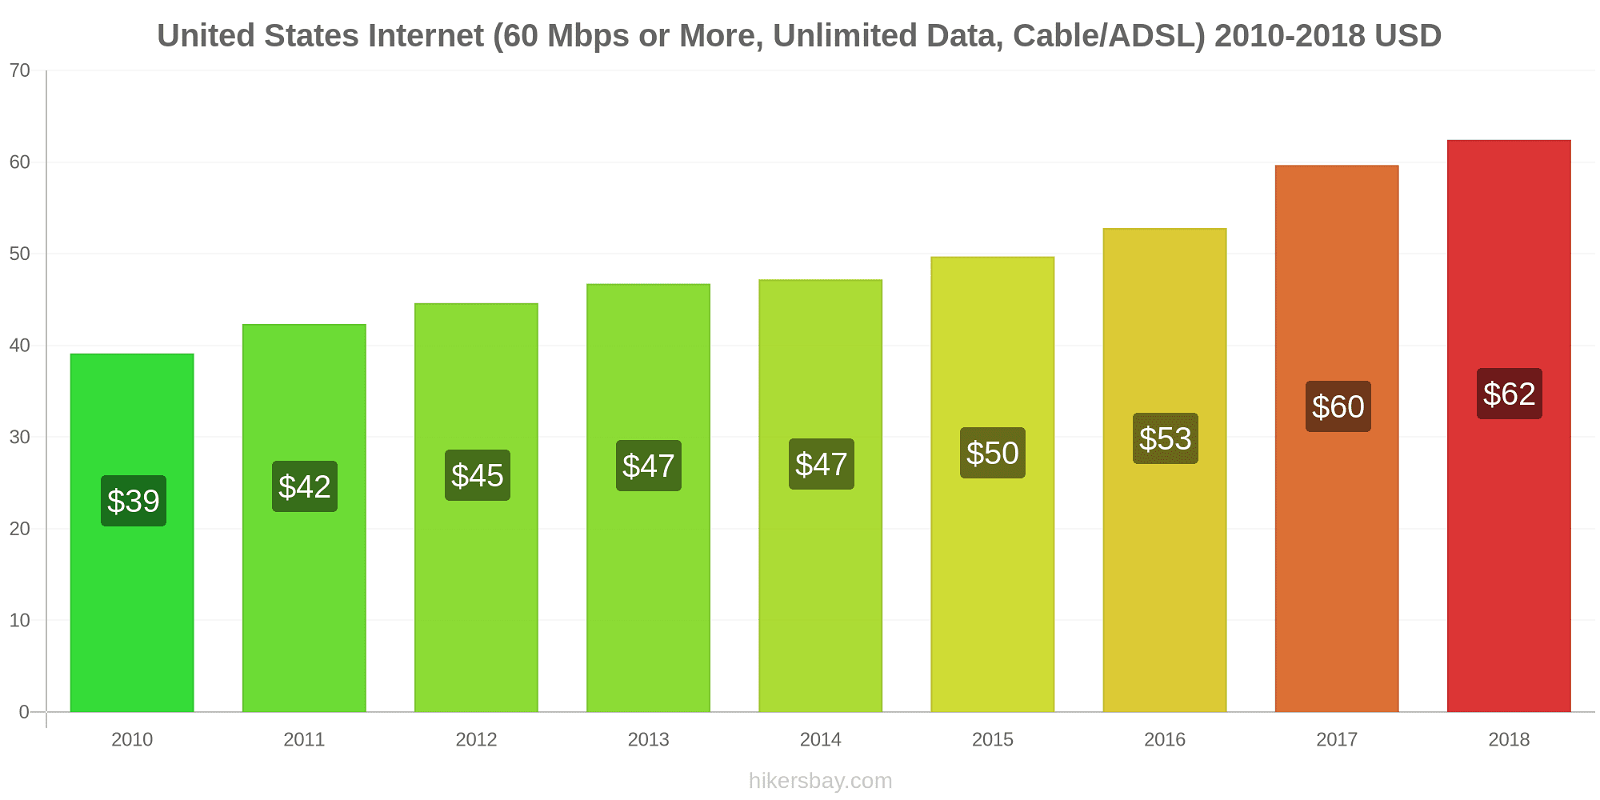 United States price changes Internet (60 Mbps or more, unlimited data, cable/ADSL) hikersbay.com